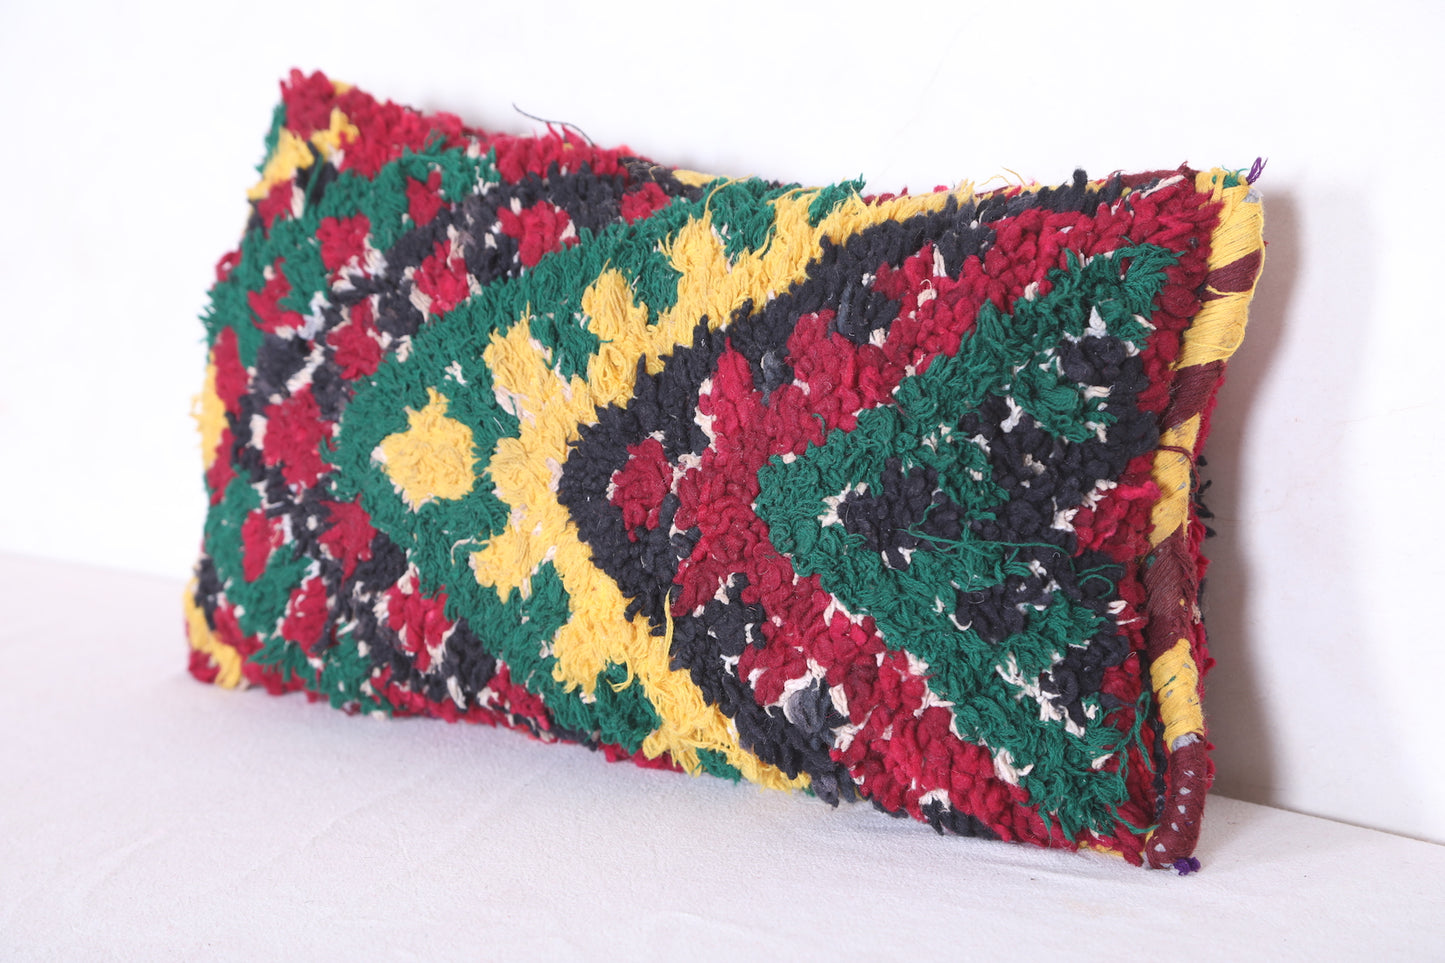 Moroccan handmade kilim pillow 10.6 INCHES X 20 INCHES